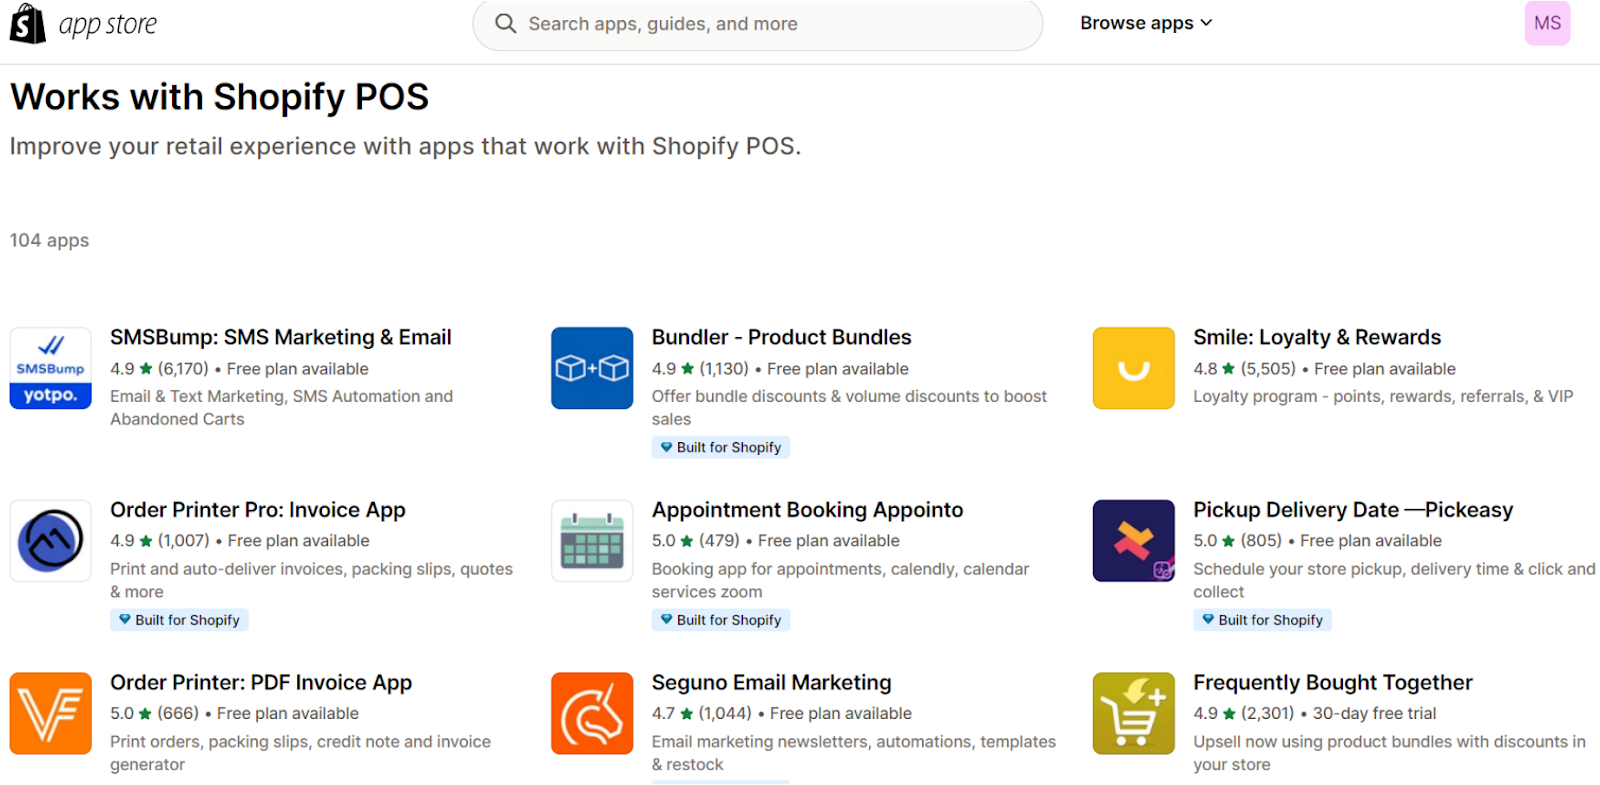 Shopify POS apps